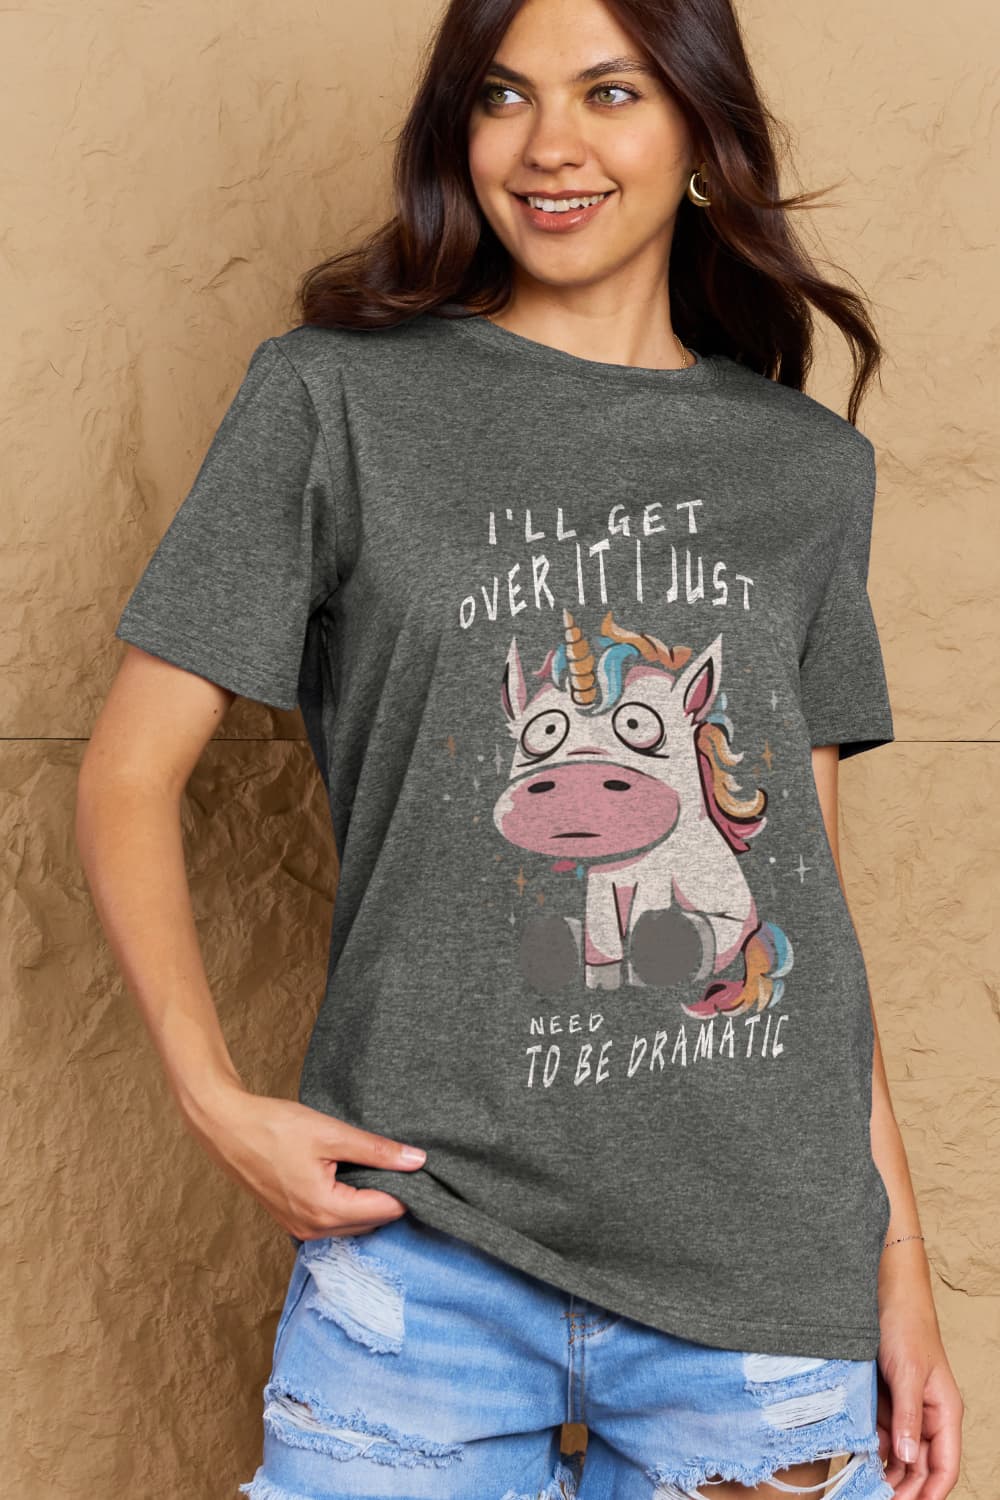 Full Size I’LL GET OVER IT I JUST NEED TO BE DRAMATIC Graphic Cotton Tee - T-Shirts - Shirts & Tops - 7 - 2024